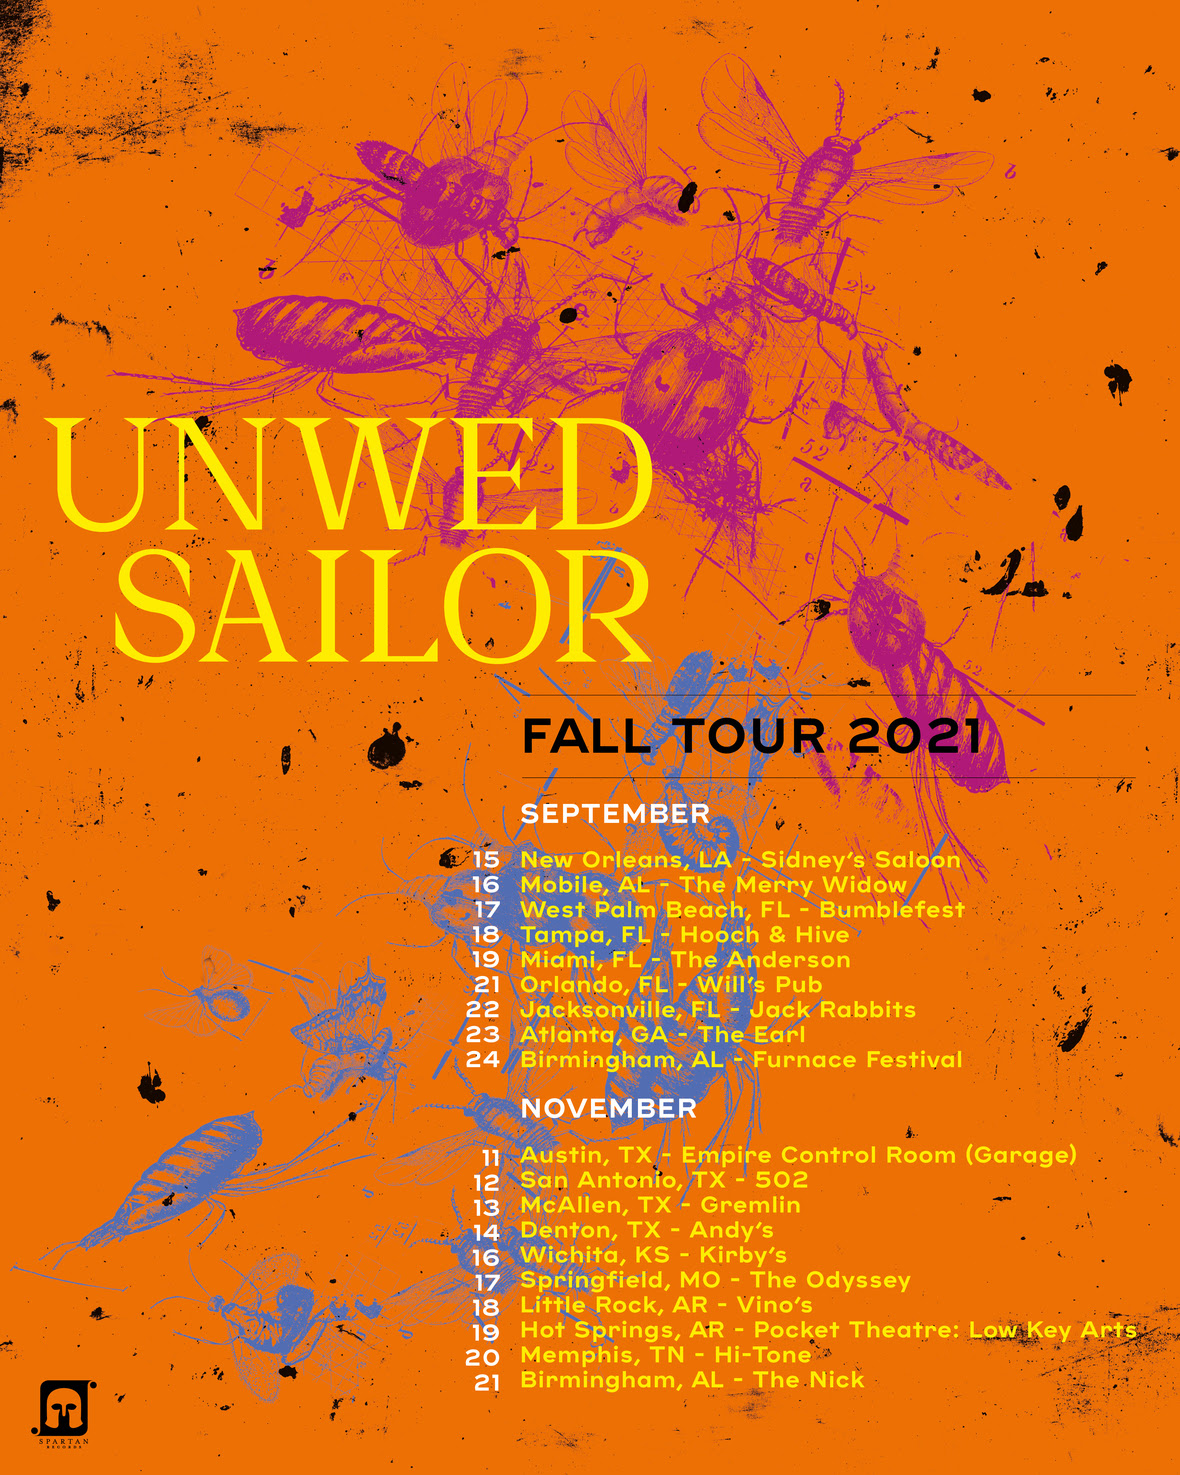 Fall Tour 2021 with Dates